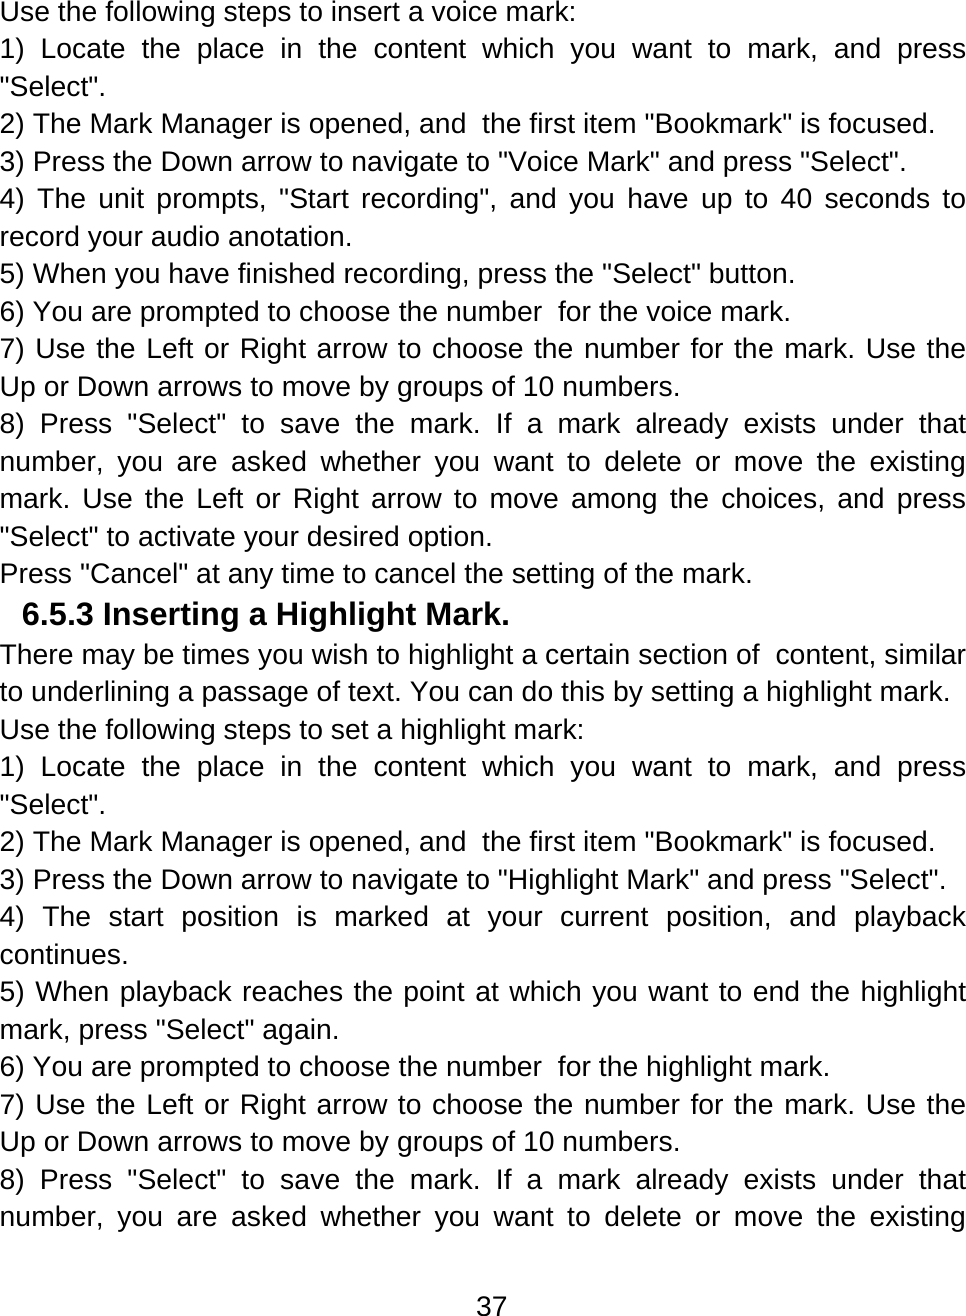 37  Use the following steps to insert a voice mark: 1) Locate the place in the content which you want to mark, and press &quot;Select&quot;. 2) The Mark Manager is opened, and  the first item &quot;Bookmark&quot; is focused. 3) Press the Down arrow to navigate to &quot;Voice Mark&quot; and press &quot;Select&quot;. 4) The unit prompts, &quot;Start recording&quot;, and you have up to 40 seconds to record your audio anotation. 5) When you have finished recording, press the &quot;Select&quot; button. 6) You are prompted to choose the number  for the voice mark.  7) Use the Left or Right arrow to choose the number for the mark. Use the Up or Down arrows to move by groups of 10 numbers.     8) Press &quot;Select&quot; to save the mark. If a mark already exists under that number, you are asked whether you want to delete or move the existing mark. Use the Left or Right arrow to move among the choices, and press &quot;Select&quot; to activate your desired option. Press &quot;Cancel&quot; at any time to cancel the setting of the mark. 6.5.3 Inserting a Highlight Mark.  There may be times you wish to highlight a certain section of  content, similar to underlining a passage of text. You can do this by setting a highlight mark. Use the following steps to set a highlight mark: 1) Locate the place in the content which you want to mark, and press &quot;Select&quot;. 2) The Mark Manager is opened, and  the first item &quot;Bookmark&quot; is focused. 3) Press the Down arrow to navigate to &quot;Highlight Mark&quot; and press &quot;Select&quot;. 4) The start position is marked at your current position, and playback continues. 5) When playback reaches the point at which you want to end the highlight mark, press &quot;Select&quot; again.  6) You are prompted to choose the number  for the highlight mark.  7) Use the Left or Right arrow to choose the number for the mark. Use the Up or Down arrows to move by groups of 10 numbers.     8) Press &quot;Select&quot; to save the mark. If a mark already exists under that number, you are asked whether you want to delete or move the existing 